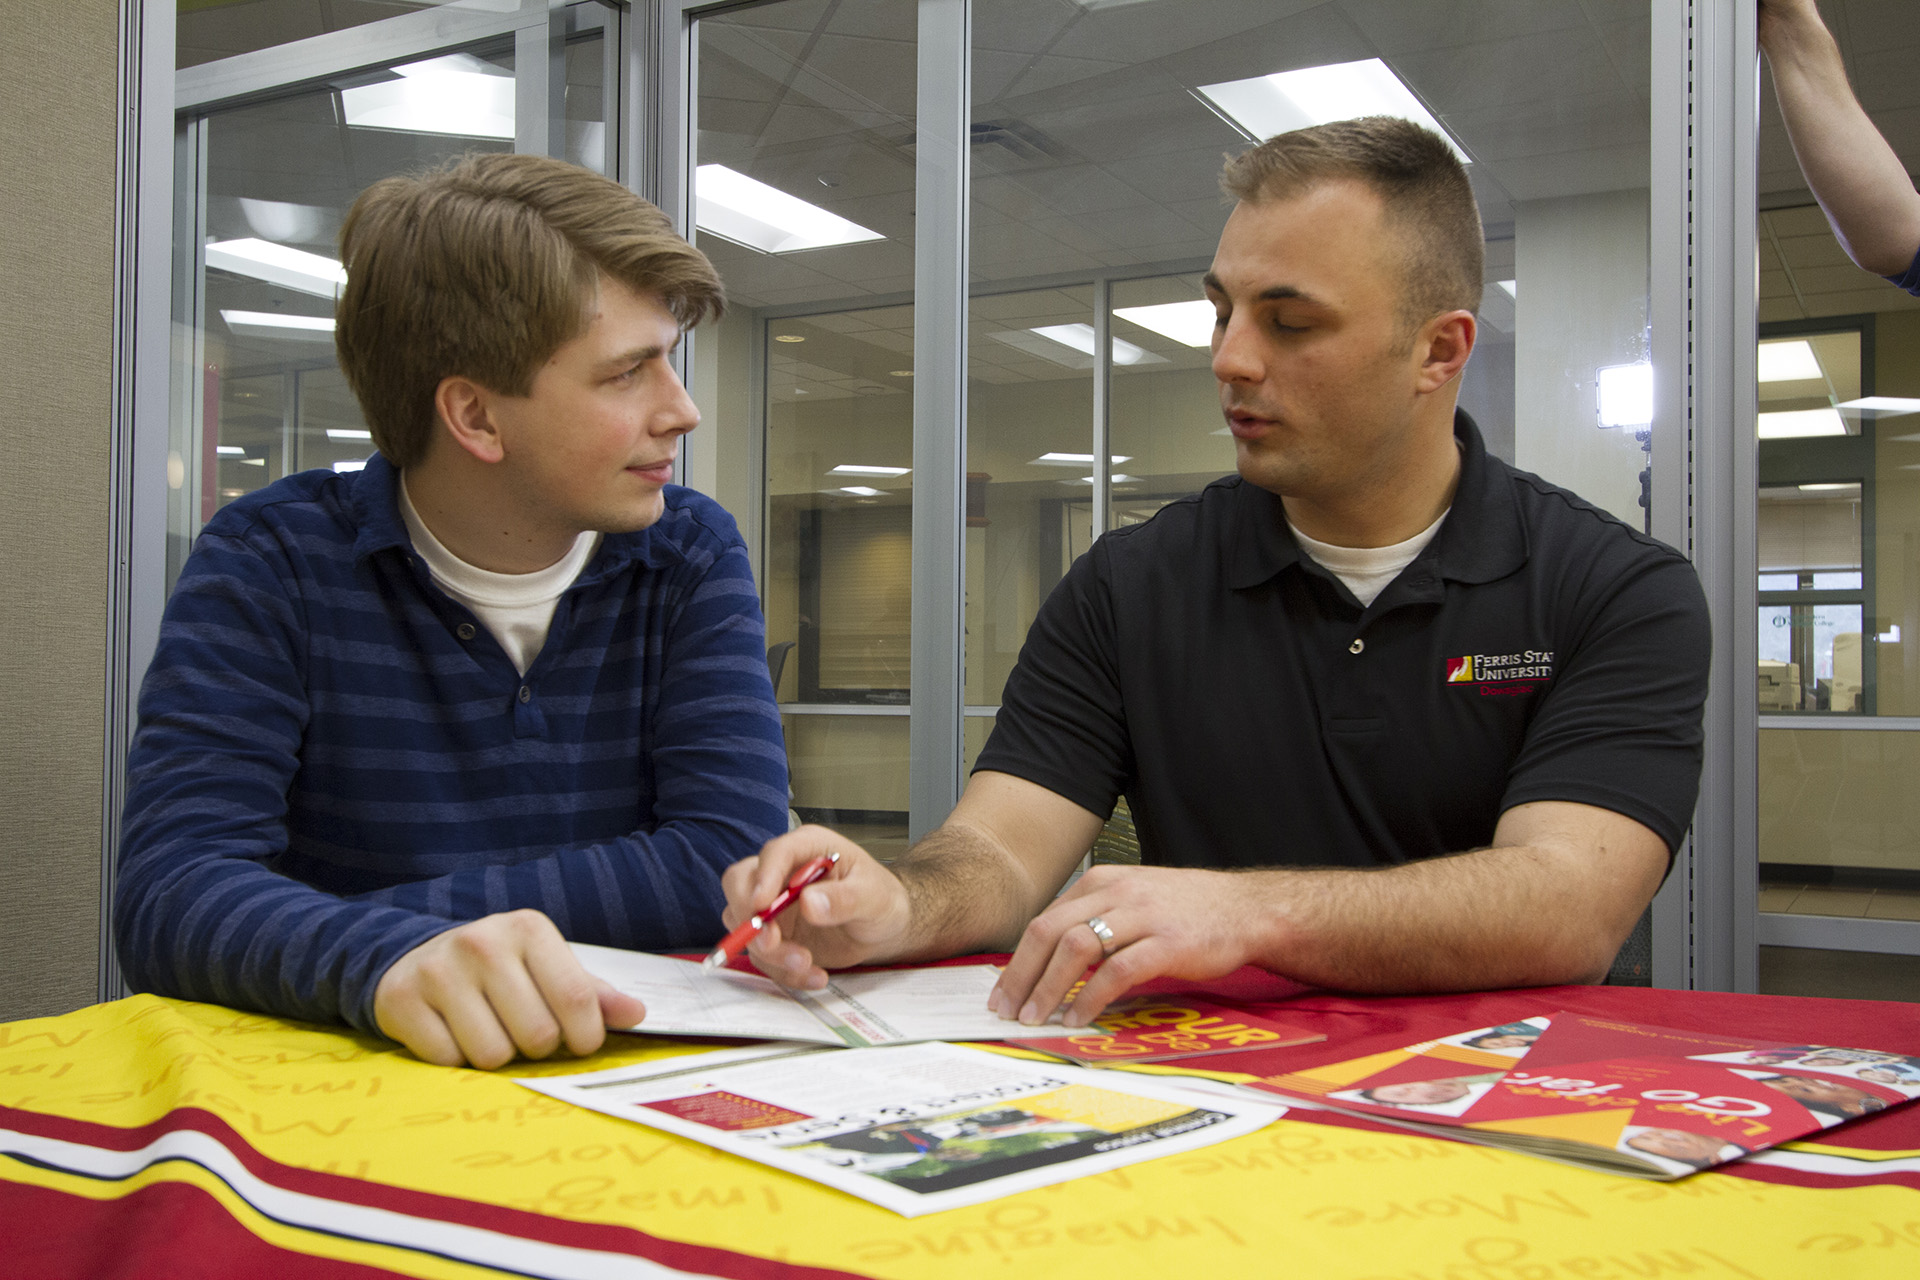 A Ferris State University transfer advisor meets with a student